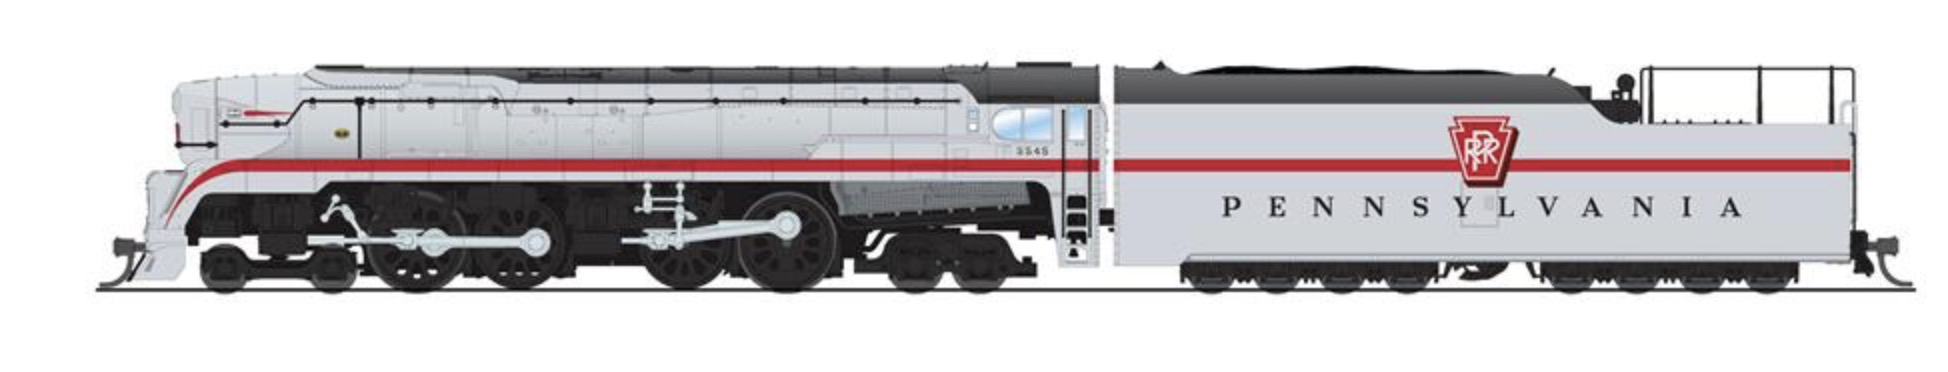 N Scale - Broadway Limited - 9028 - Locomotive, Steam, 4-4-4-4 T1 - Pennsylvania - 5545